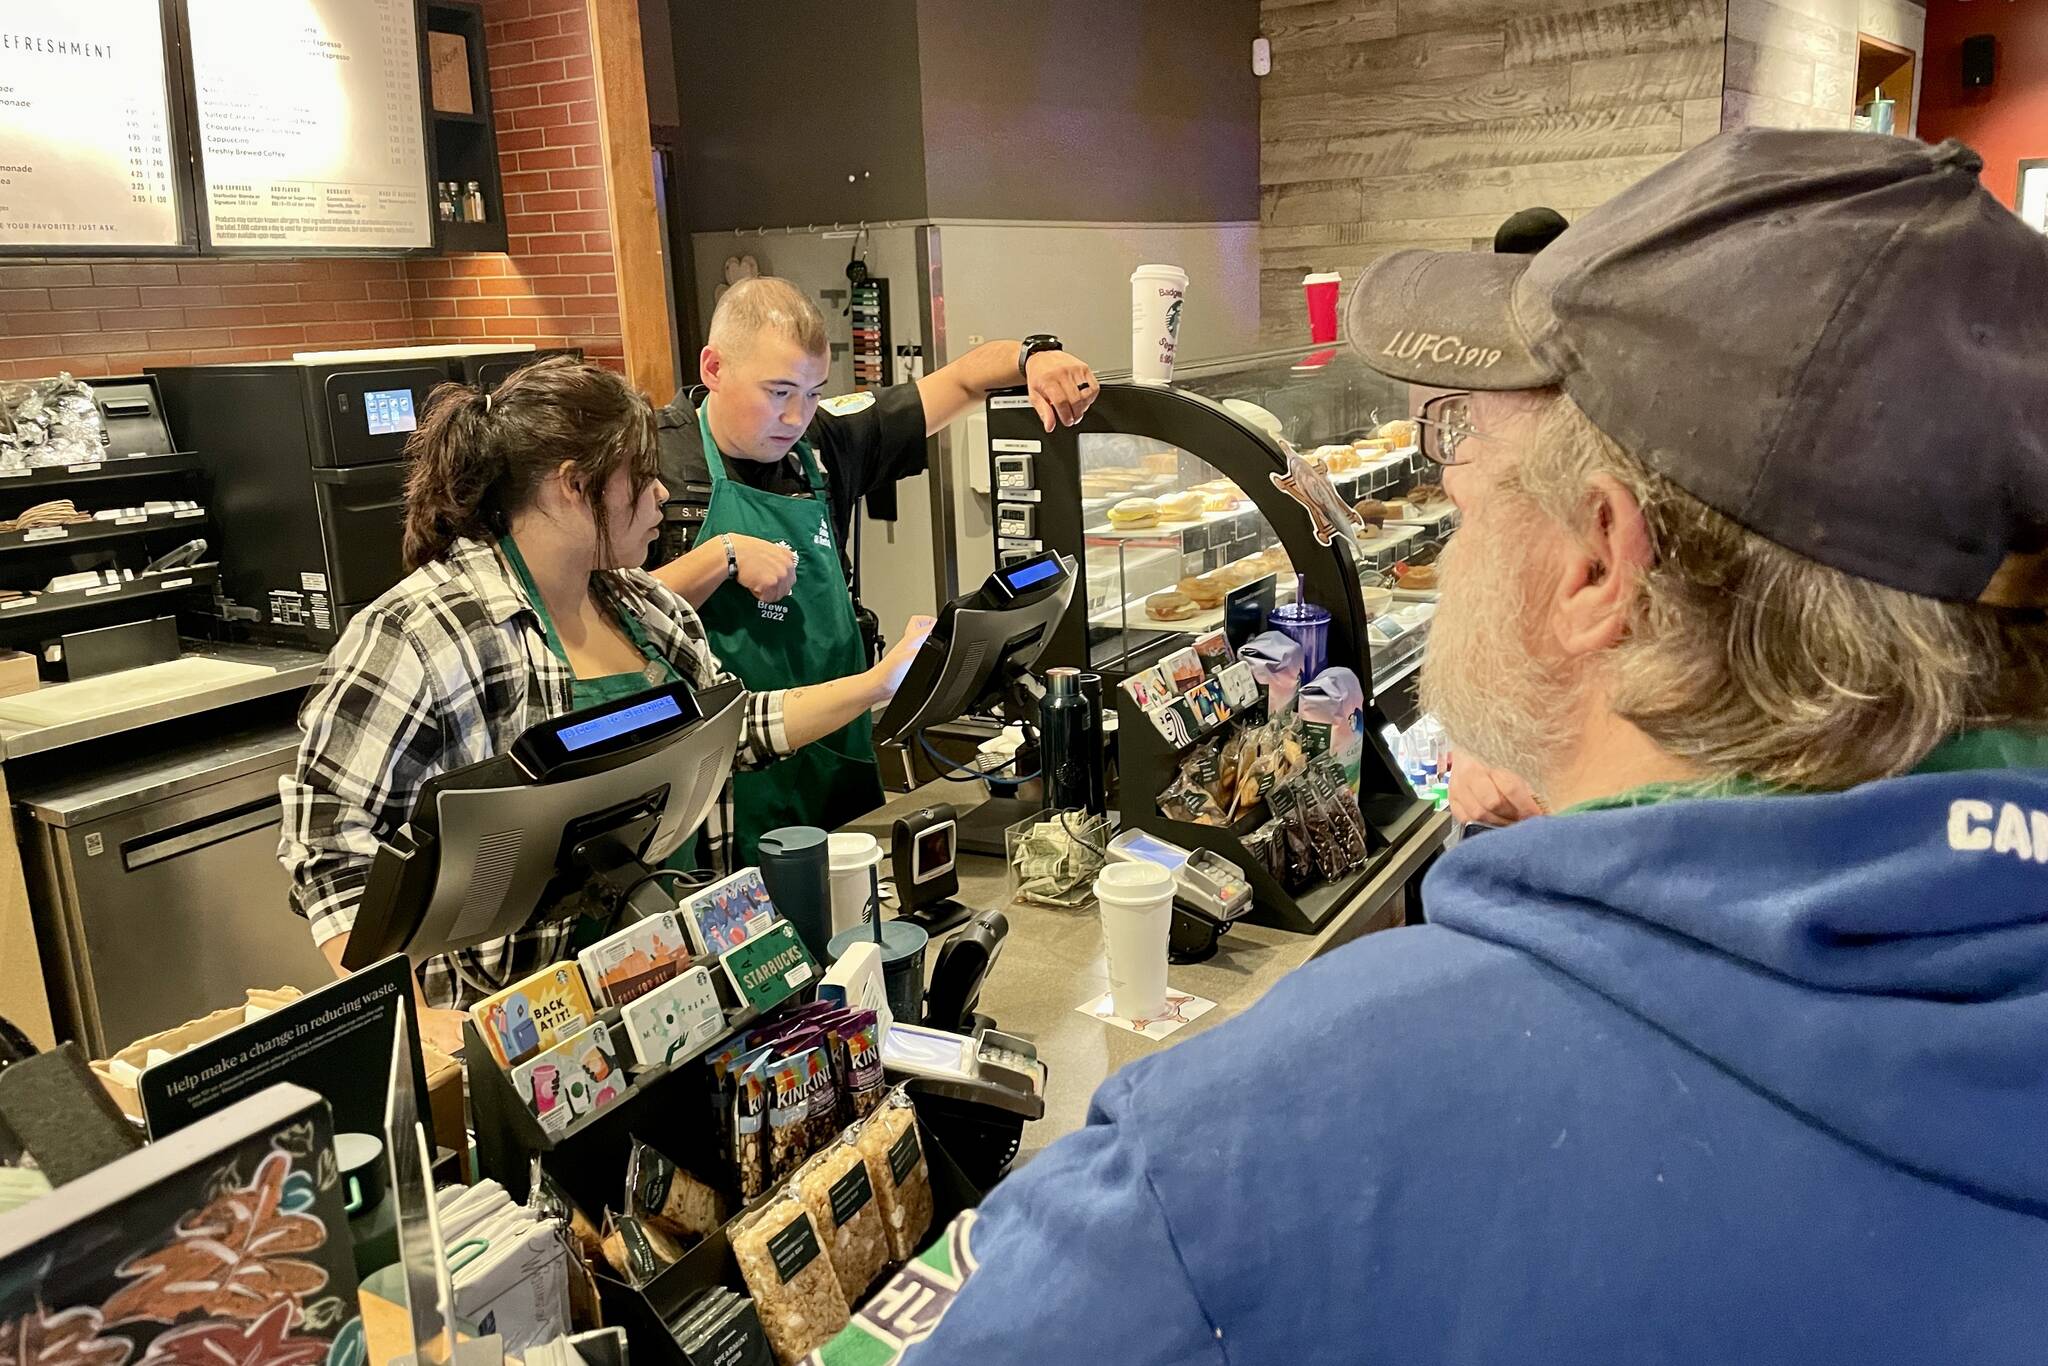 Michael S. Lockett / The Daily World 
Detective Stephen Heller, in green apron, reckons with the register during Badges & Brews, hosted at Starbucks.